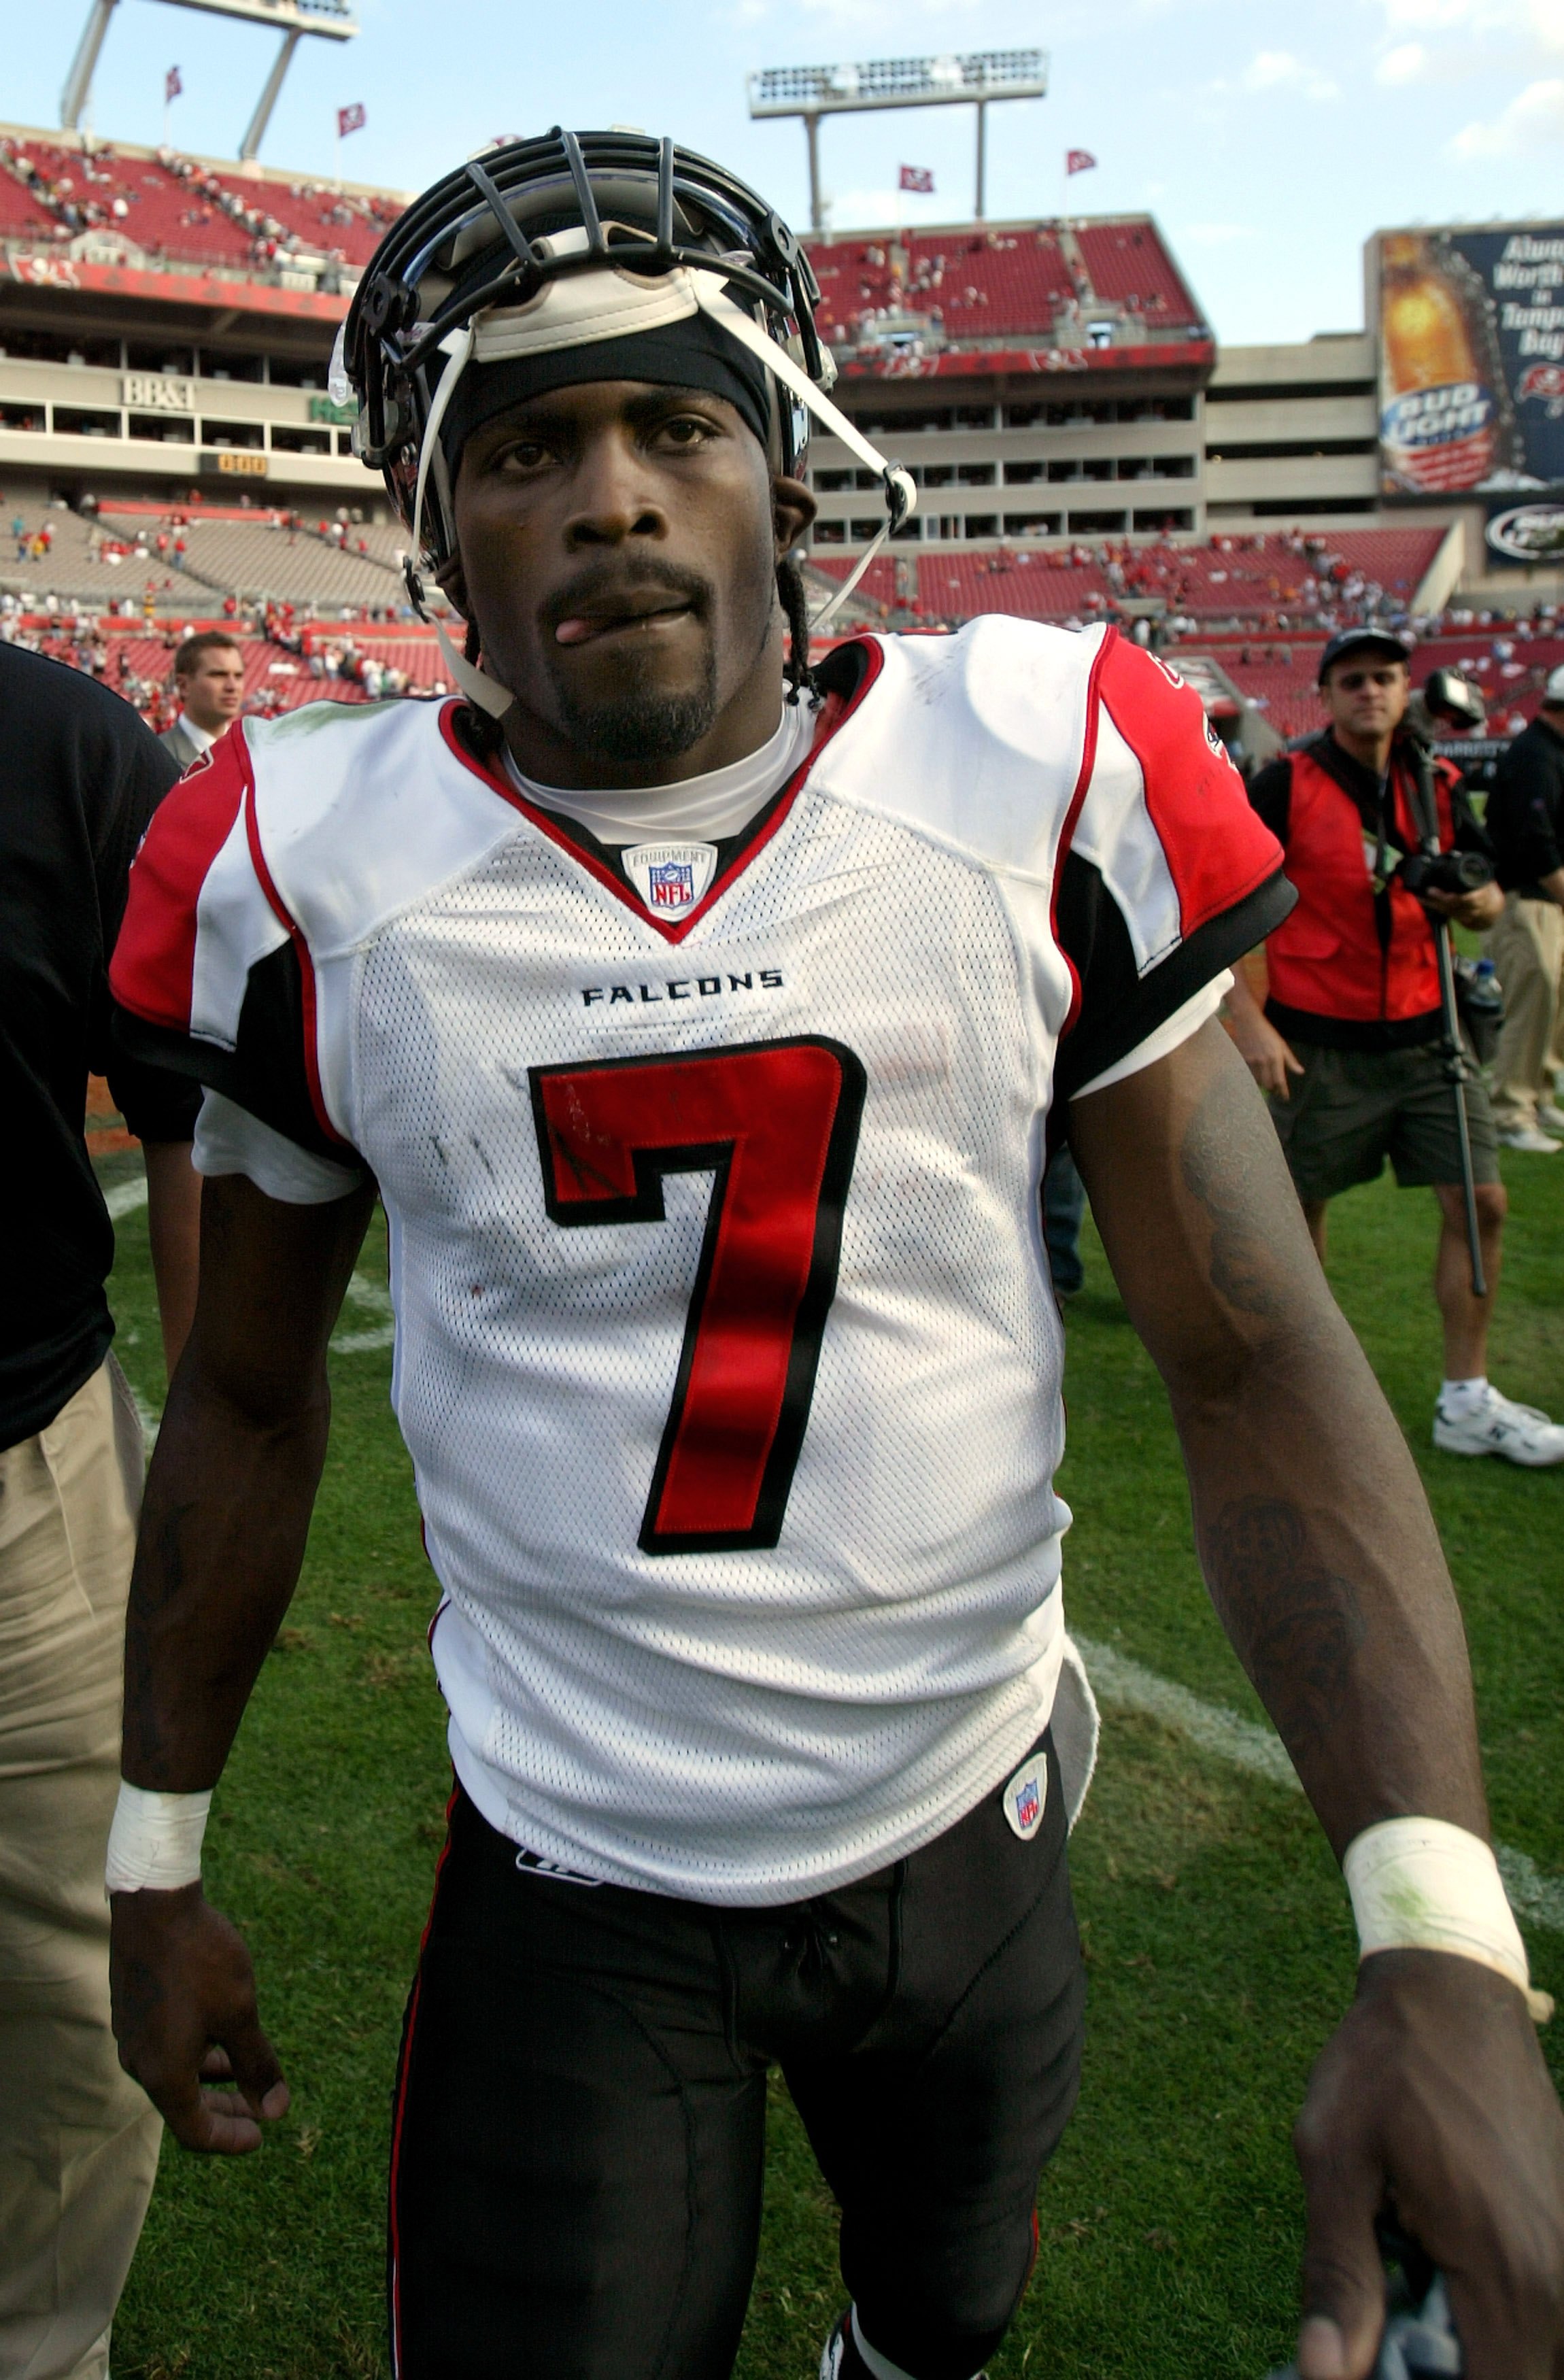 TAMPA, FL - DECEMBER 10:  Quarterback Michael Vick #7 of the Atlanta Falcons leaves the field after the Falcons defeated the Tampa Bay Buccaneers on December 10, 2006 at Raymond James Stadium in Tampa, Florida. The Falcons defeated the Buccaneers 17-6.  (